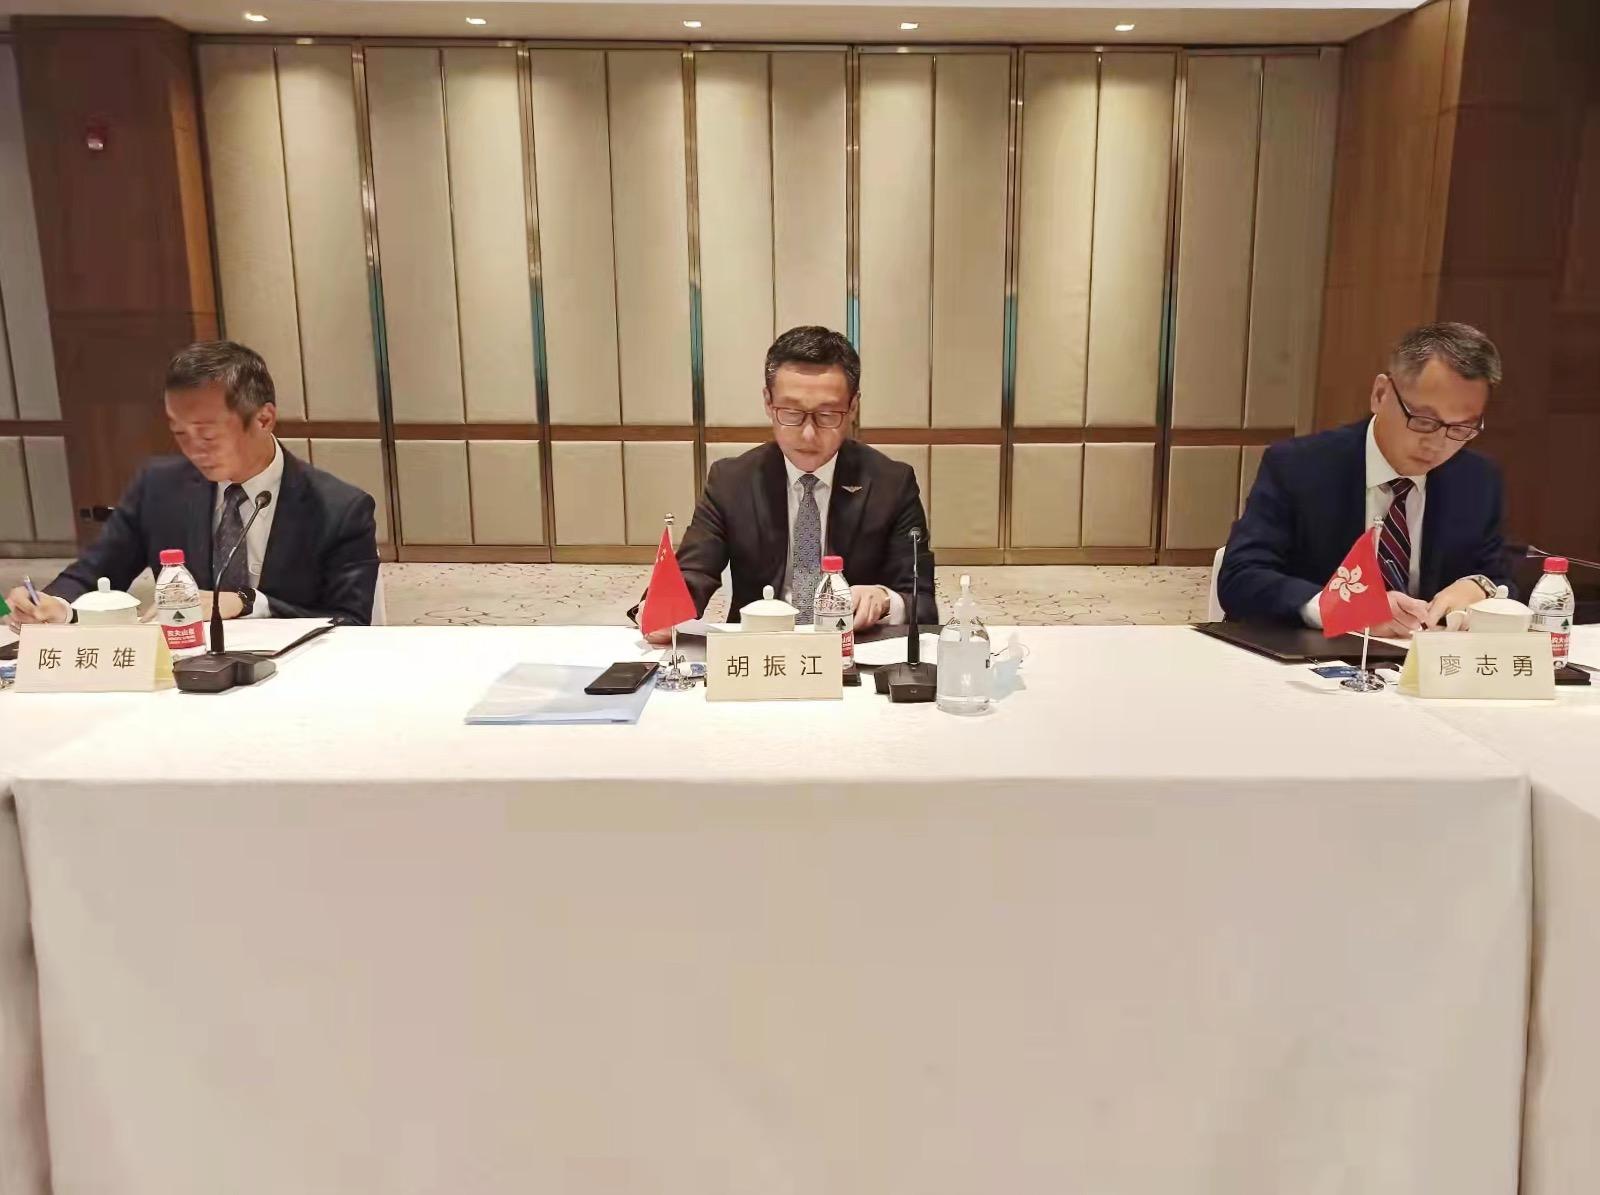 Deputy Administrator of the Civil Aviation Administration of China Mr Hu Zhenjiang (centre); the Director-General of the Civil Aviation Department of Hong Kong, Mr Victor Liu (right); and the President of the Civil Aviation Authority of Macao, Mr Chan Weng-hong (left), sign the Joint Maintenance Management Cooperation Arrangement today (November 30).